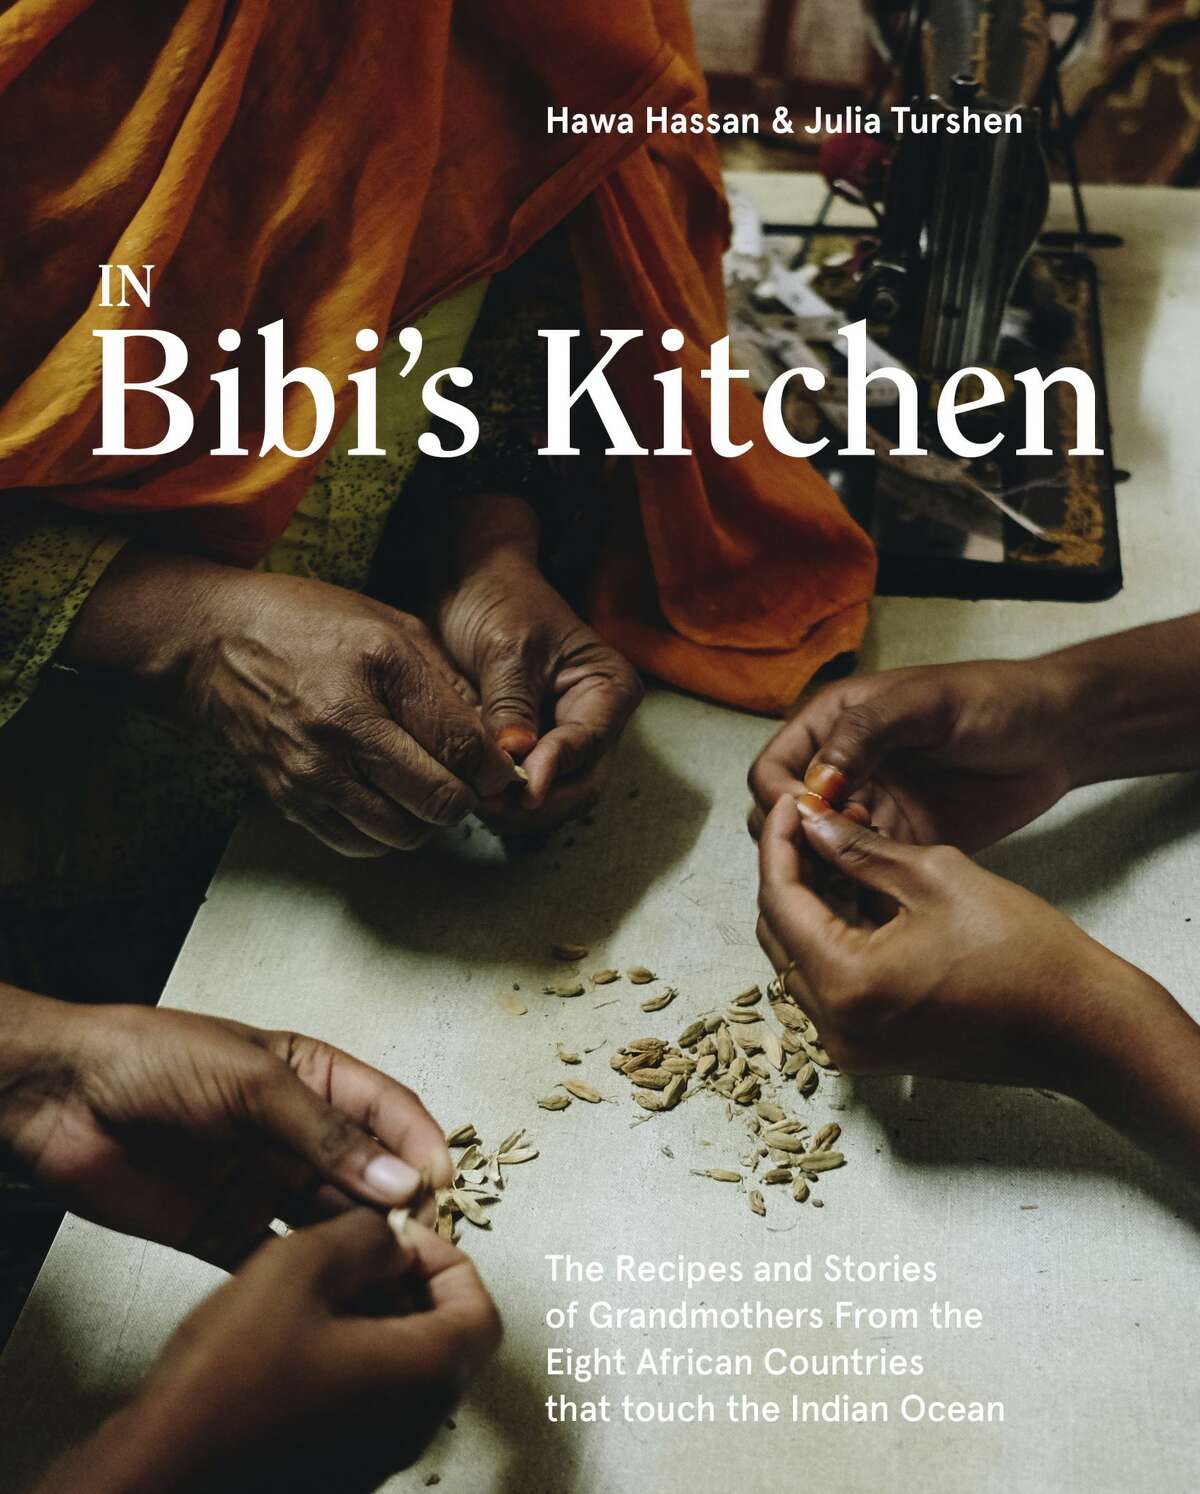 Hawa Hassan's upcoming cookbook, “In Bibi’s Kitchen,” explores recipes and stories of grandmothers from eight African countries that touch the Indian Ocean.